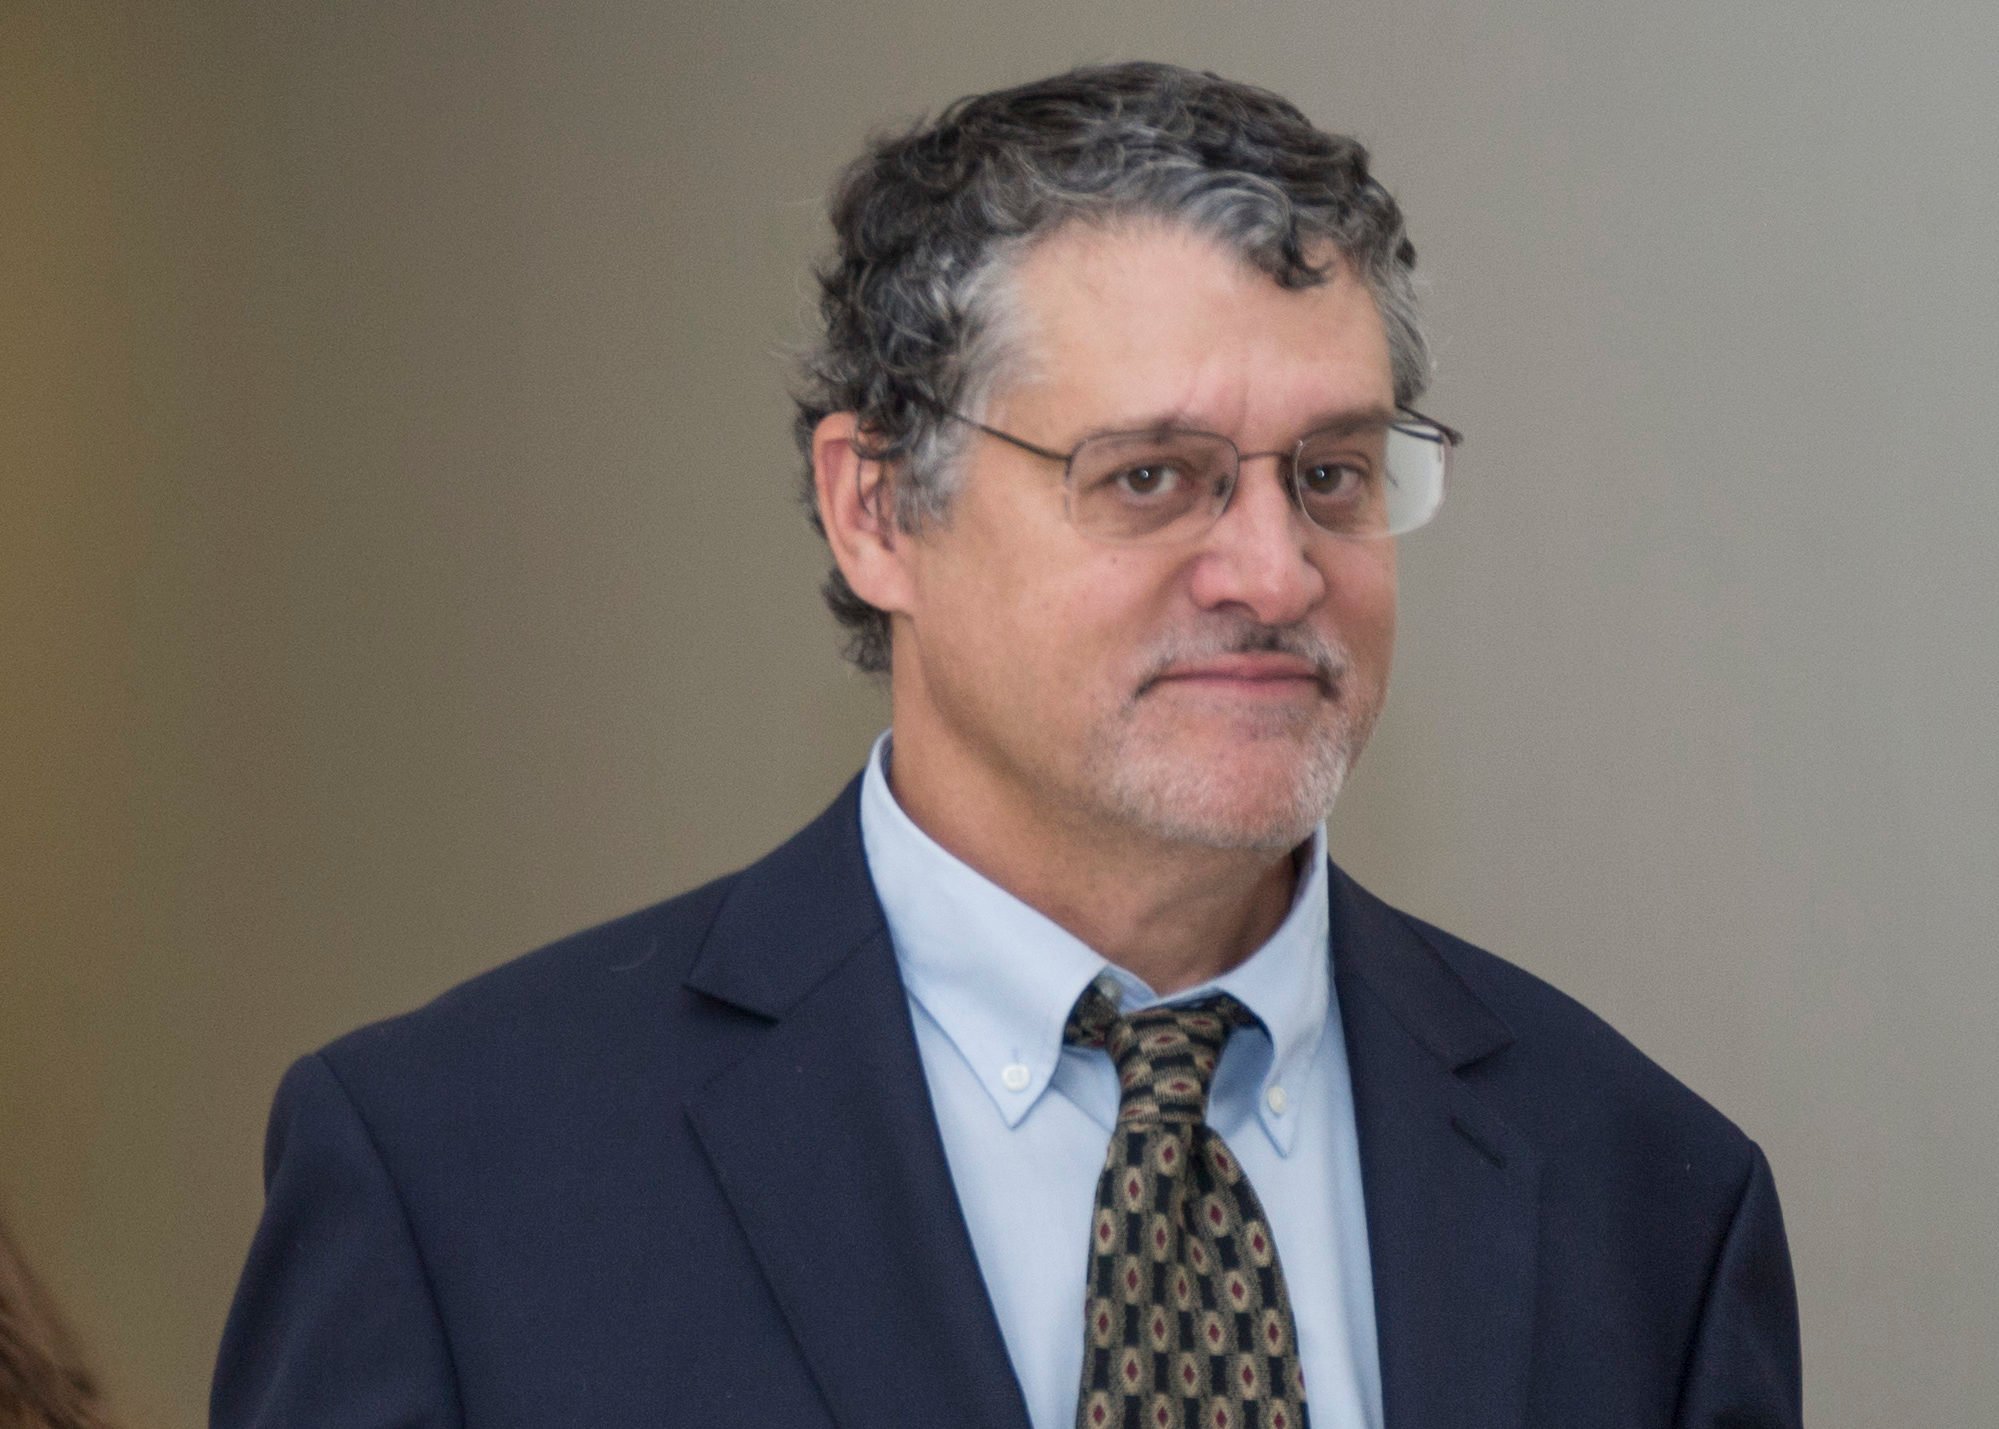 Fusion GPS Co-Founder Glenn Simpson on Capitol Hill on October 16, 2018 in Washington, DC. (Zach Gibson/Getty Images)